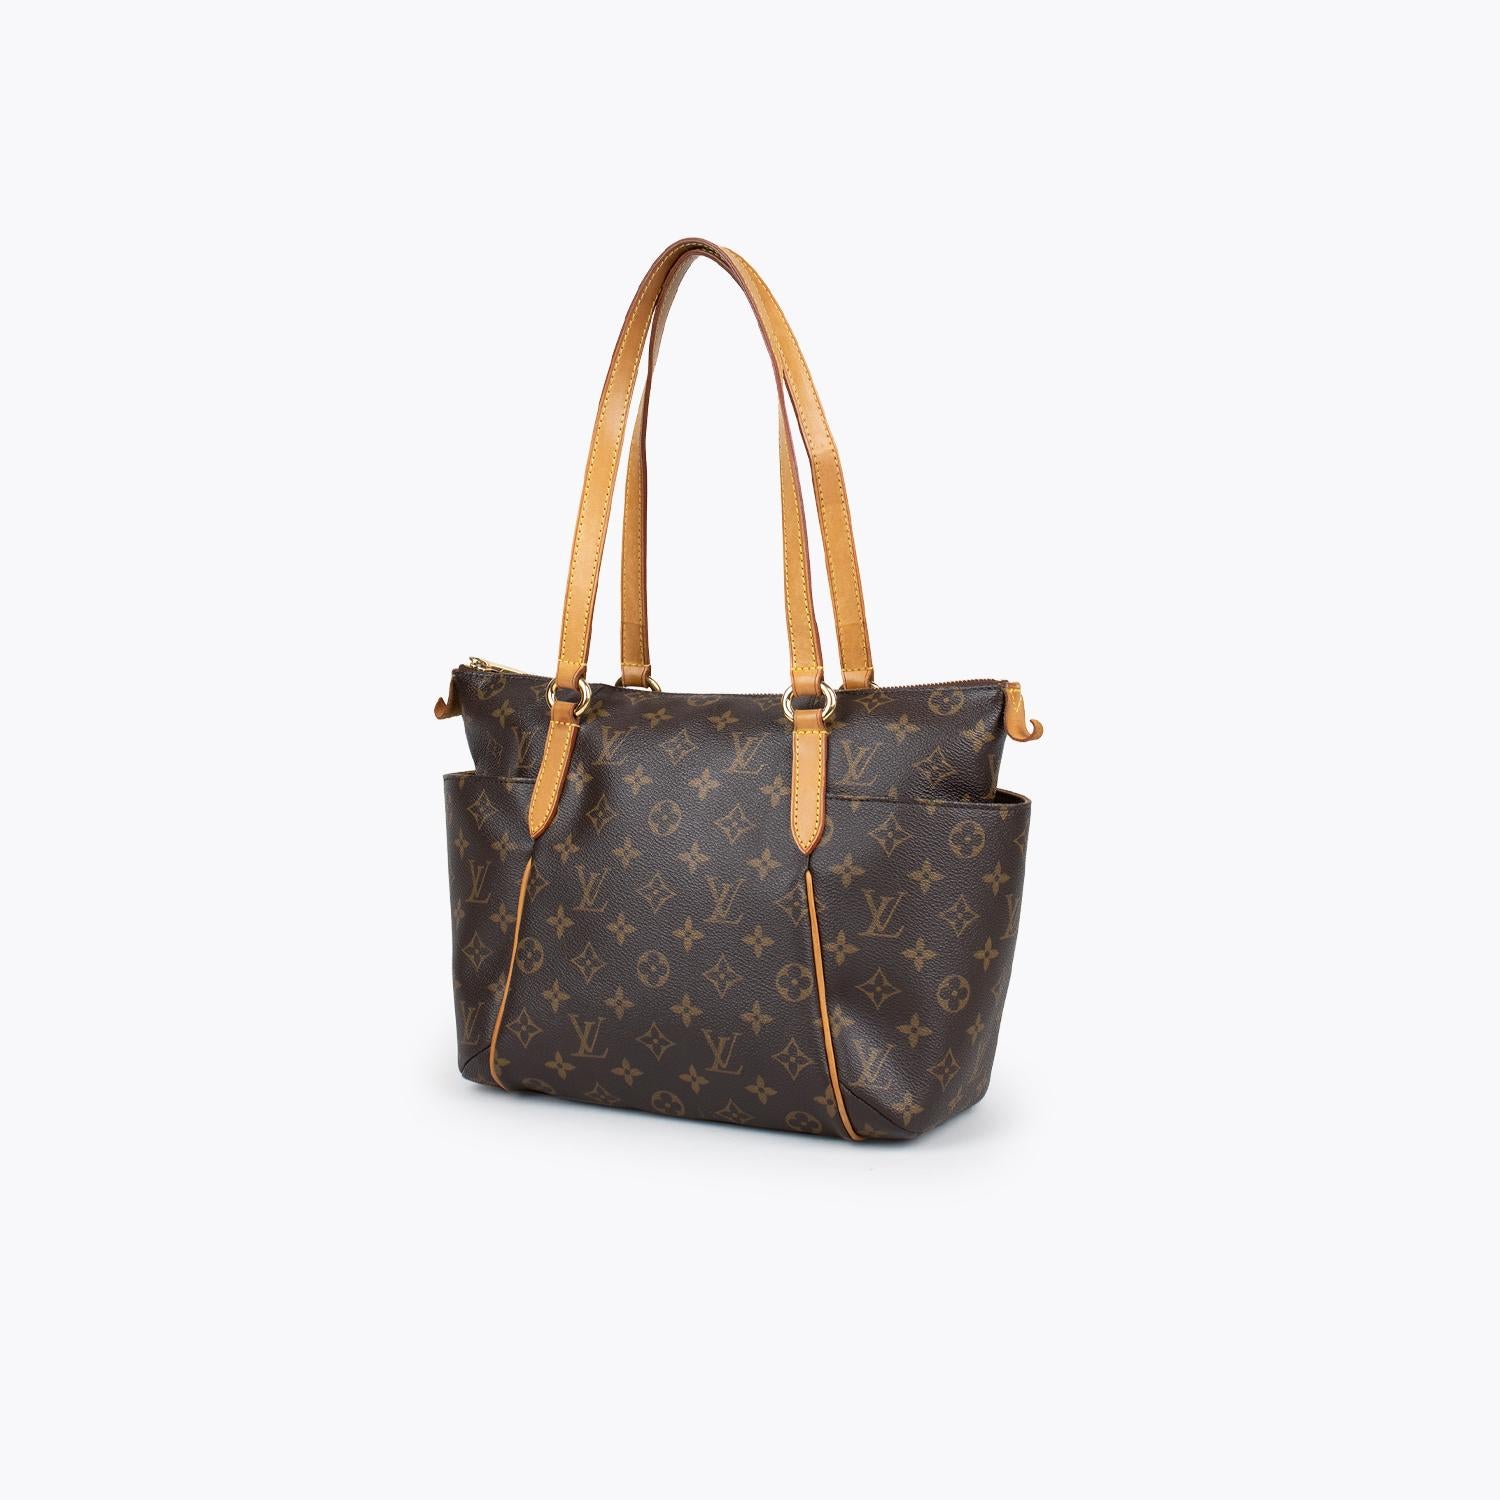 Brown and tan monogram coated canvas Louis Vuitton Bosphore Messenger PM with

- Brass hardware
- Single flat adjustable canvas shoulder strap
- Tan Vachetta leather trim
- Dual exterior pockets; one with zip closure at front flap, brown canvas